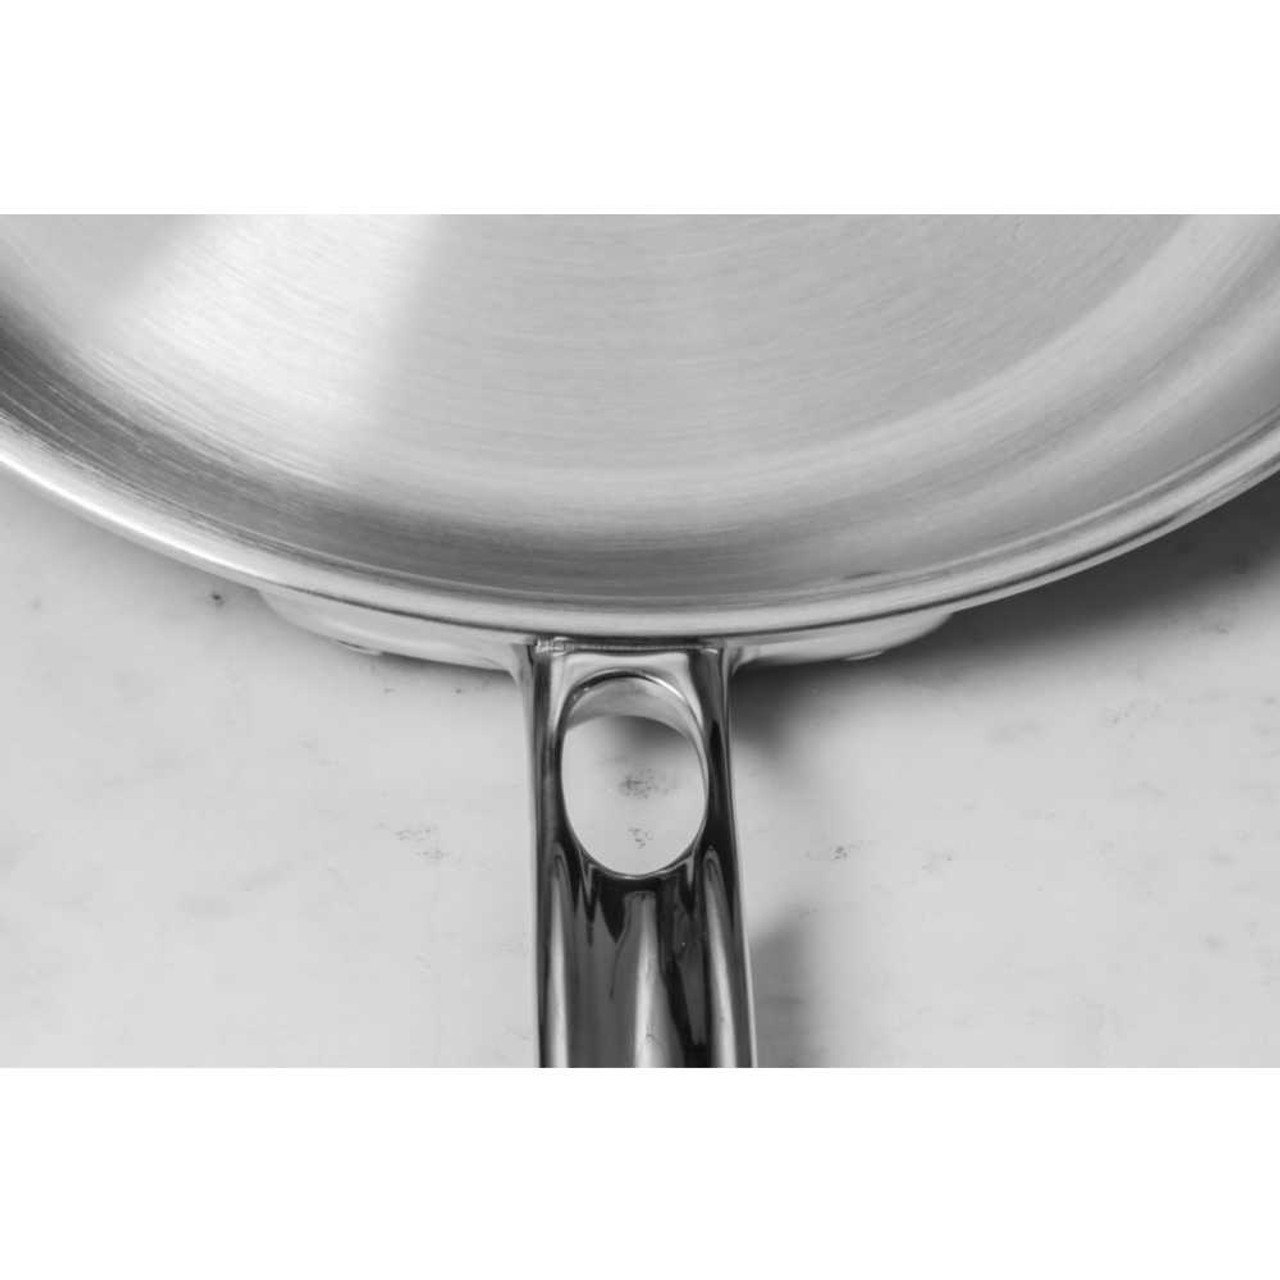 Hestan Thomas Keller Insignia Commercial Clad Stainless Steel 11